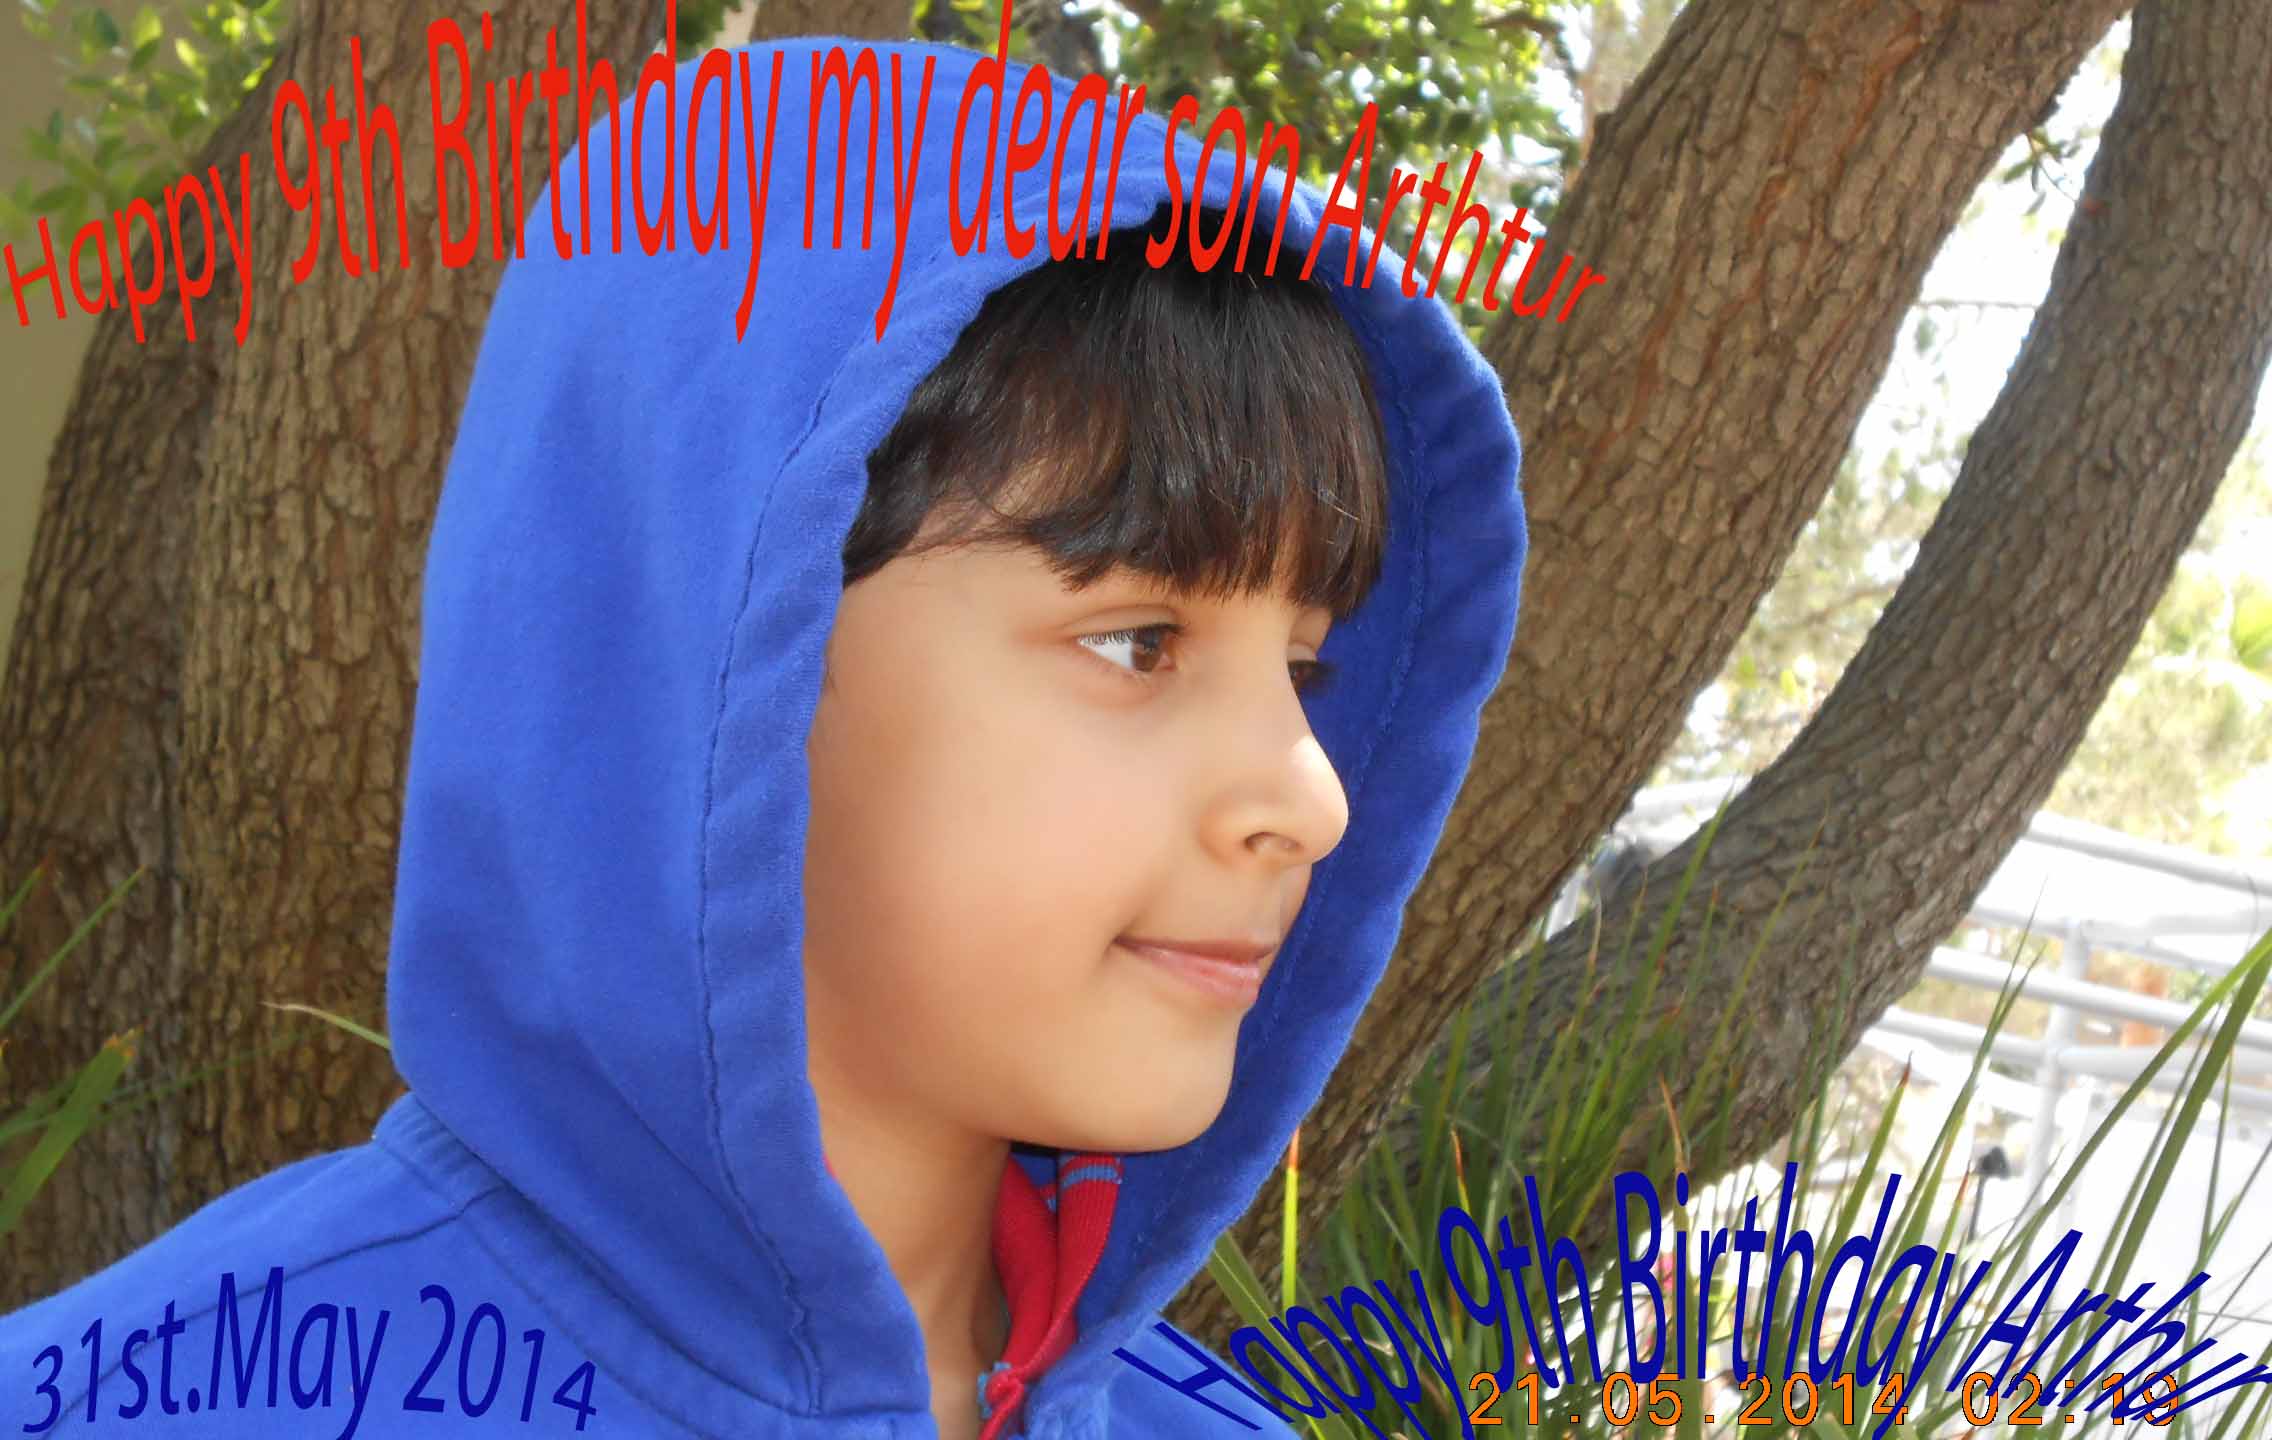 My son Arthur is 9 years old. He has acted in one film and sang for another. He is tall and handsome. Please have a look at https://www.facebook.com/Arthurbabuantony?ref=hl. You can contact me at babuantonyactor@gmail.com if you have any questions. Thanks